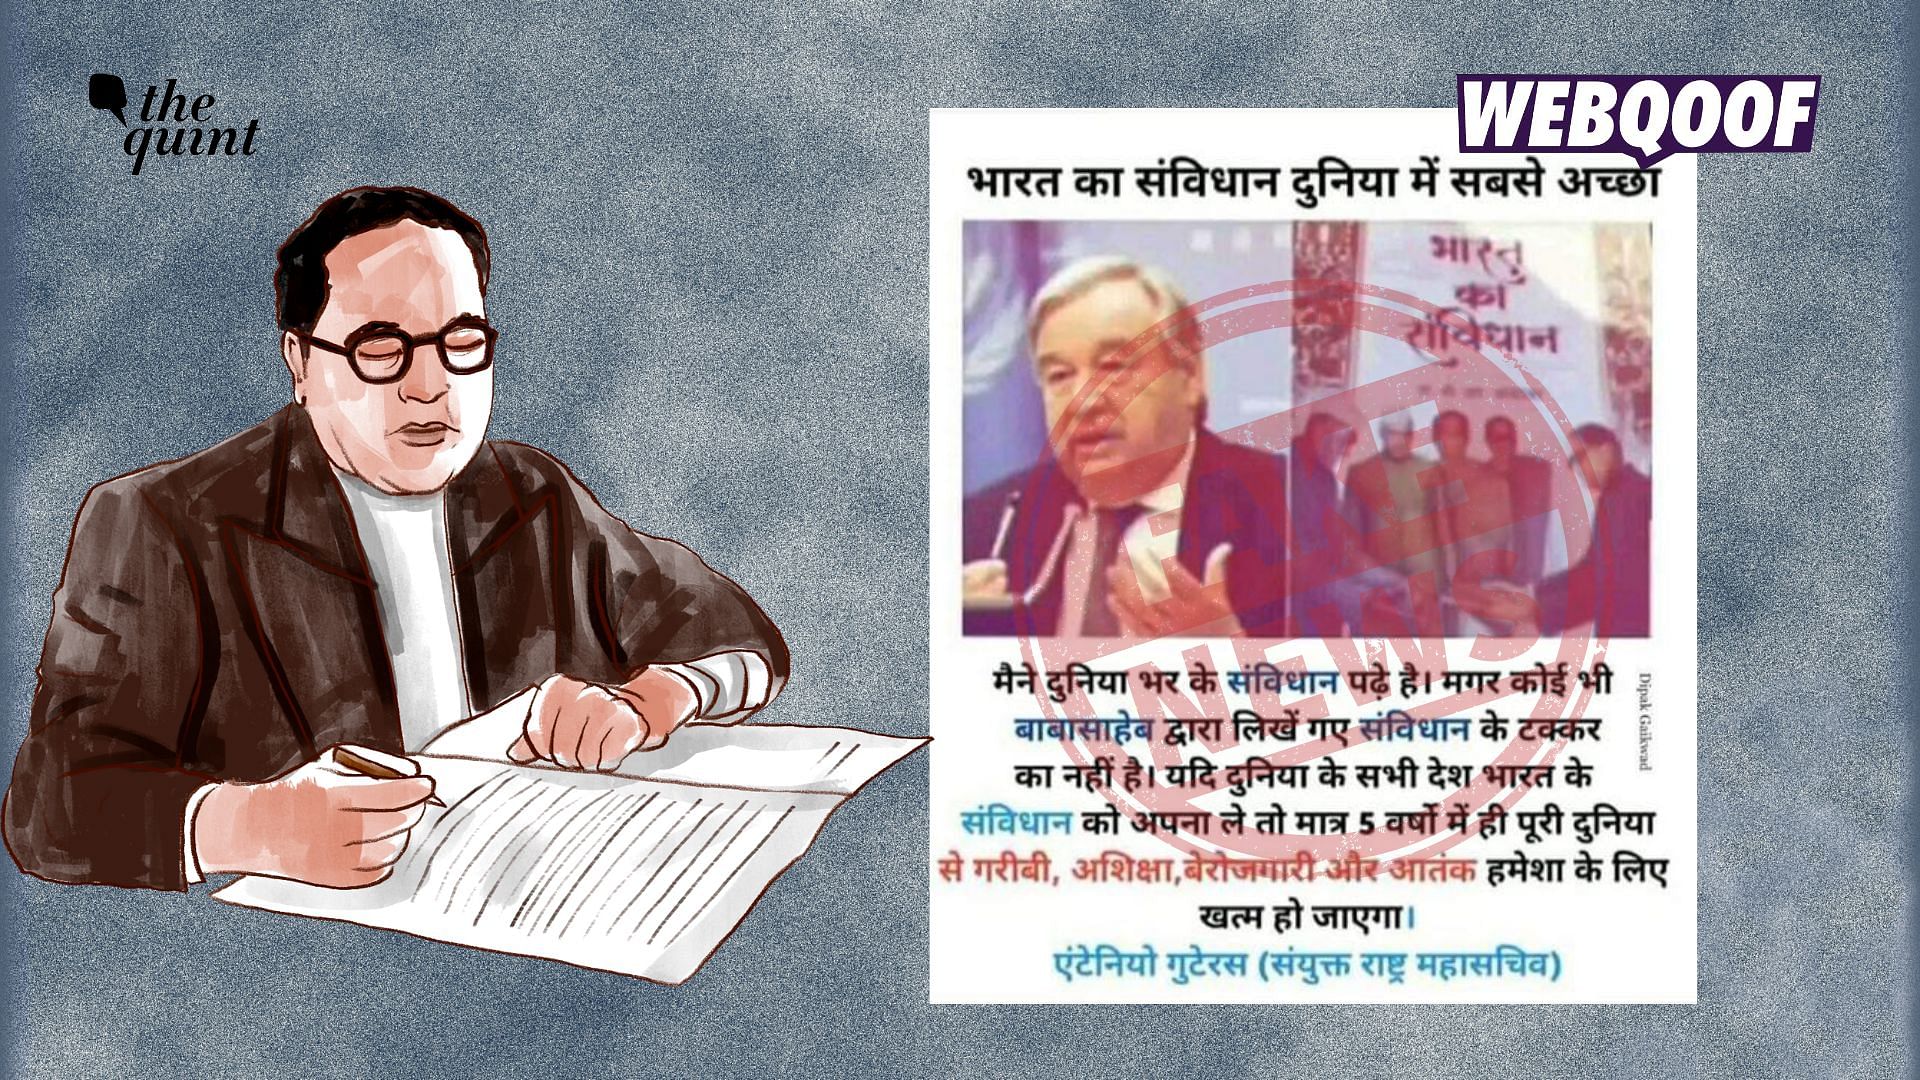 <div class="paragraphs"><p>The viral post has no proof to back the claim that UN Secretary General Antonio Guterres called India's Constitution, written by BR Ambedkar, the best in the world.</p></div>